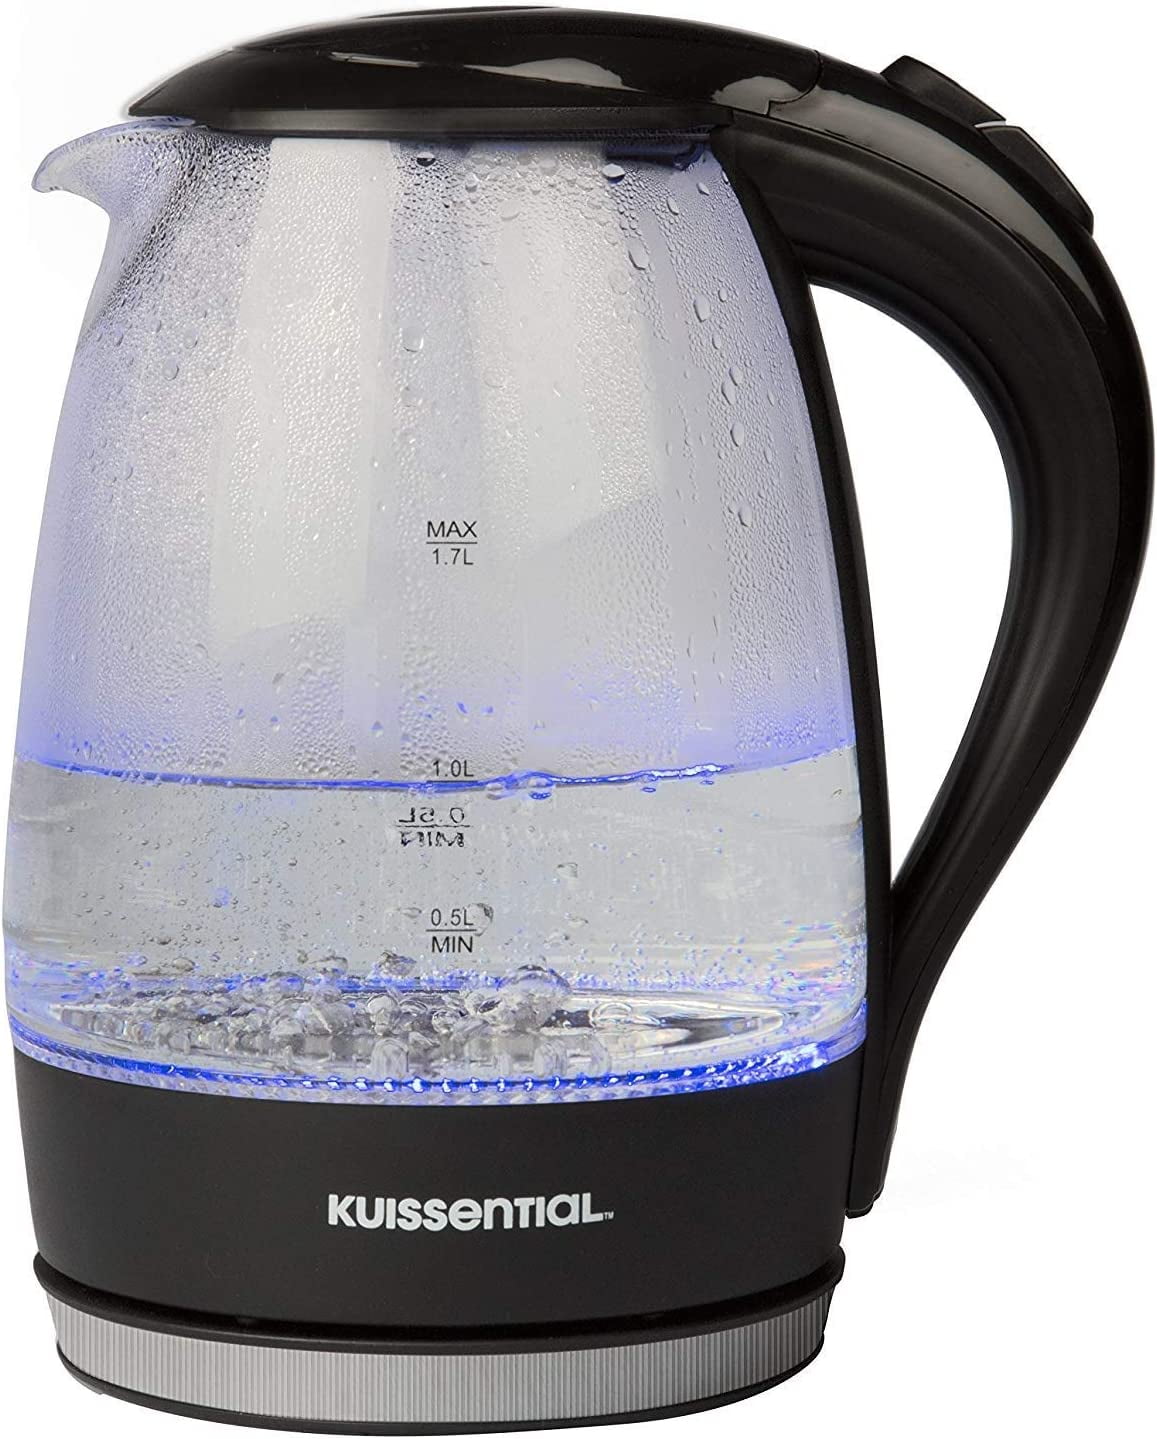 Stainless Steel Electric Water Kettle 1.7 Liter, Fast Heating with